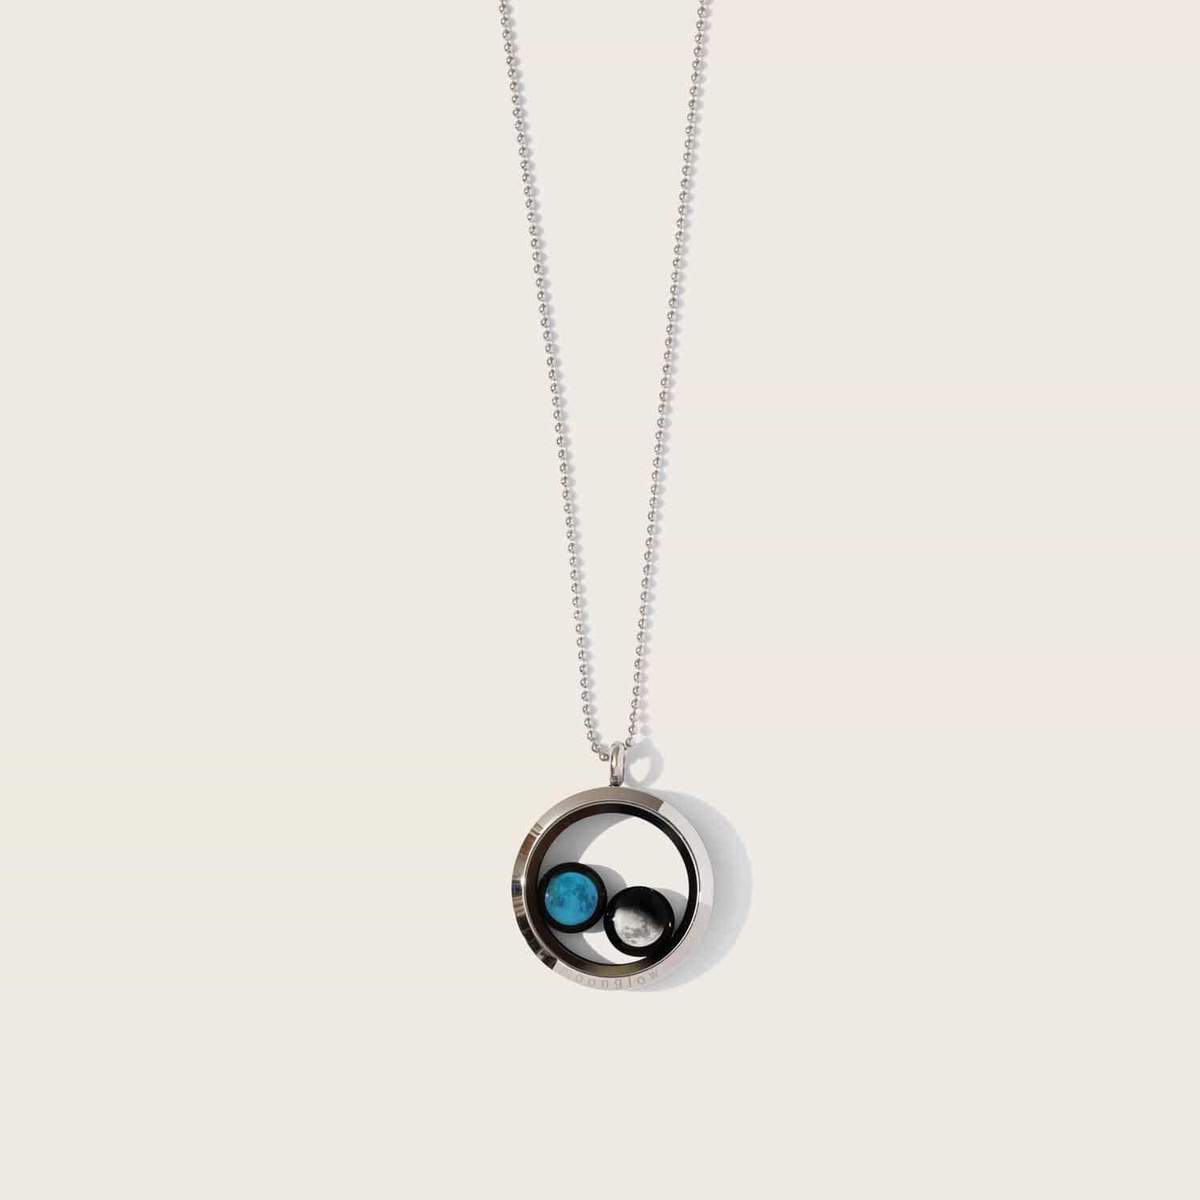 Lovers In The Locket Necklace in Stainless Steel